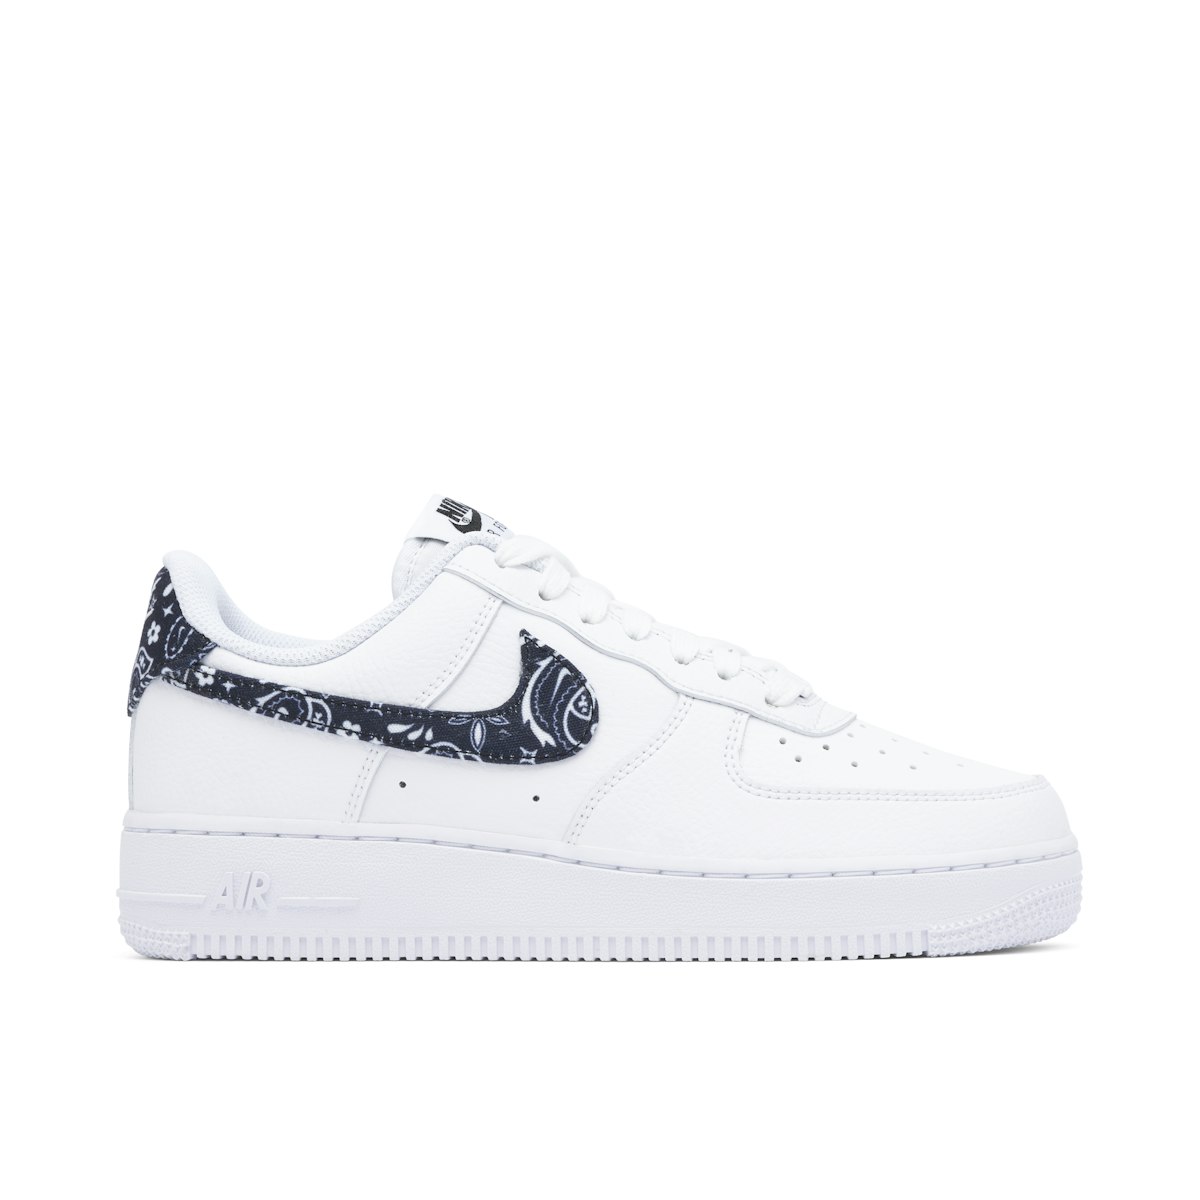 Nike Air Force 1 Low 07 LV8 Double Swoosh White Armory Blue GS